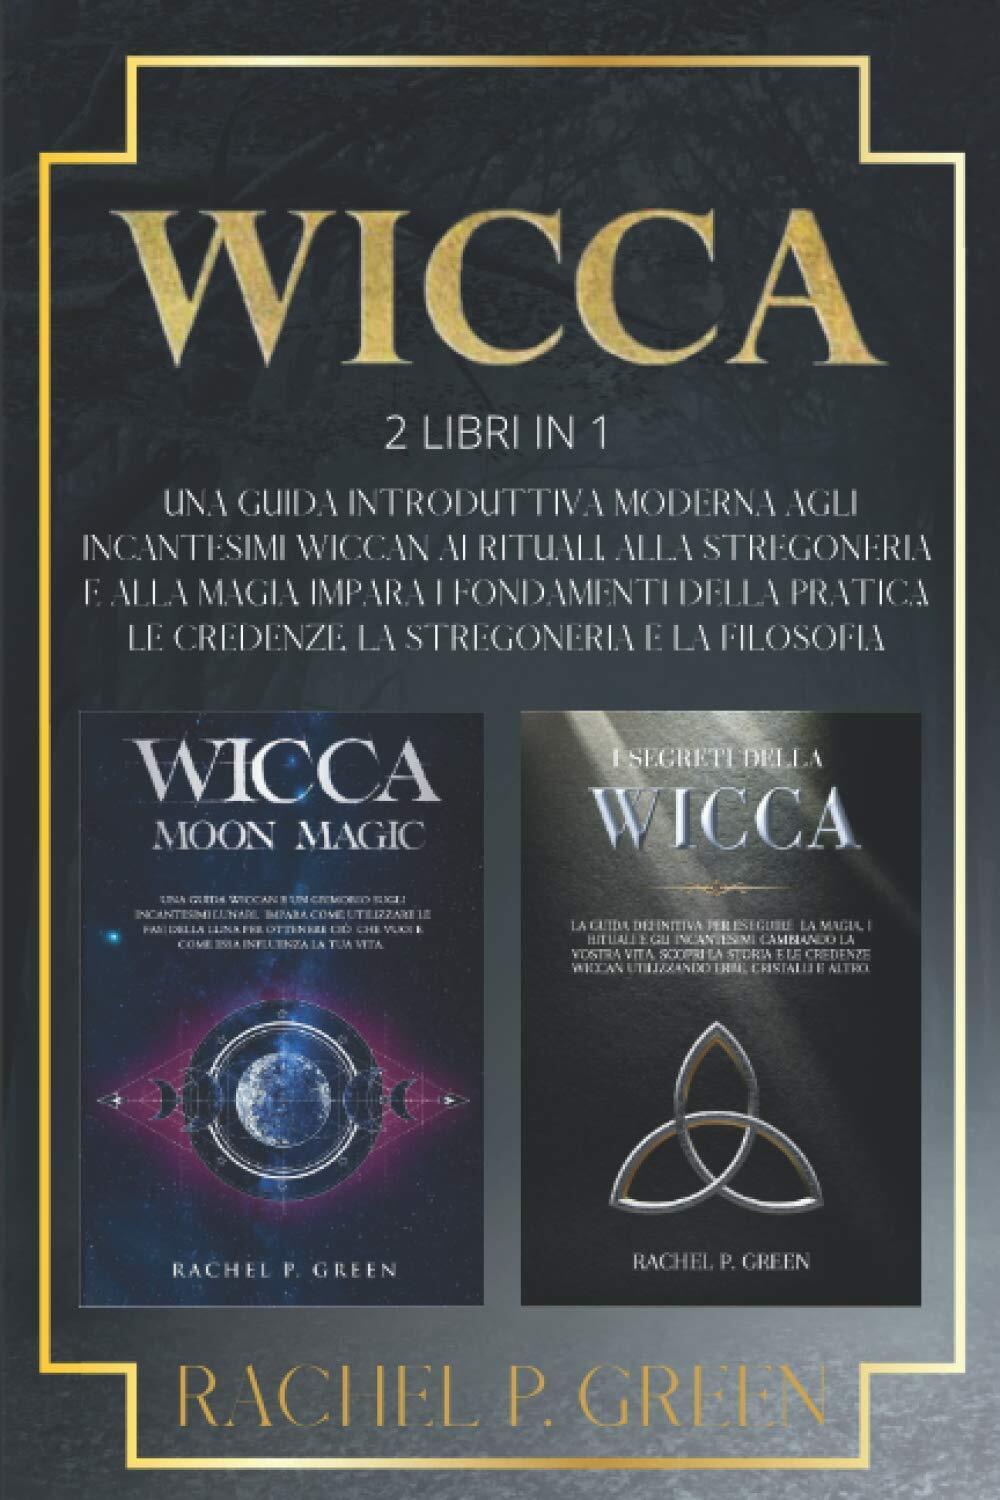 WICCA: 2 Libri in 1 - Rachel P. Green - Independently published, 2020